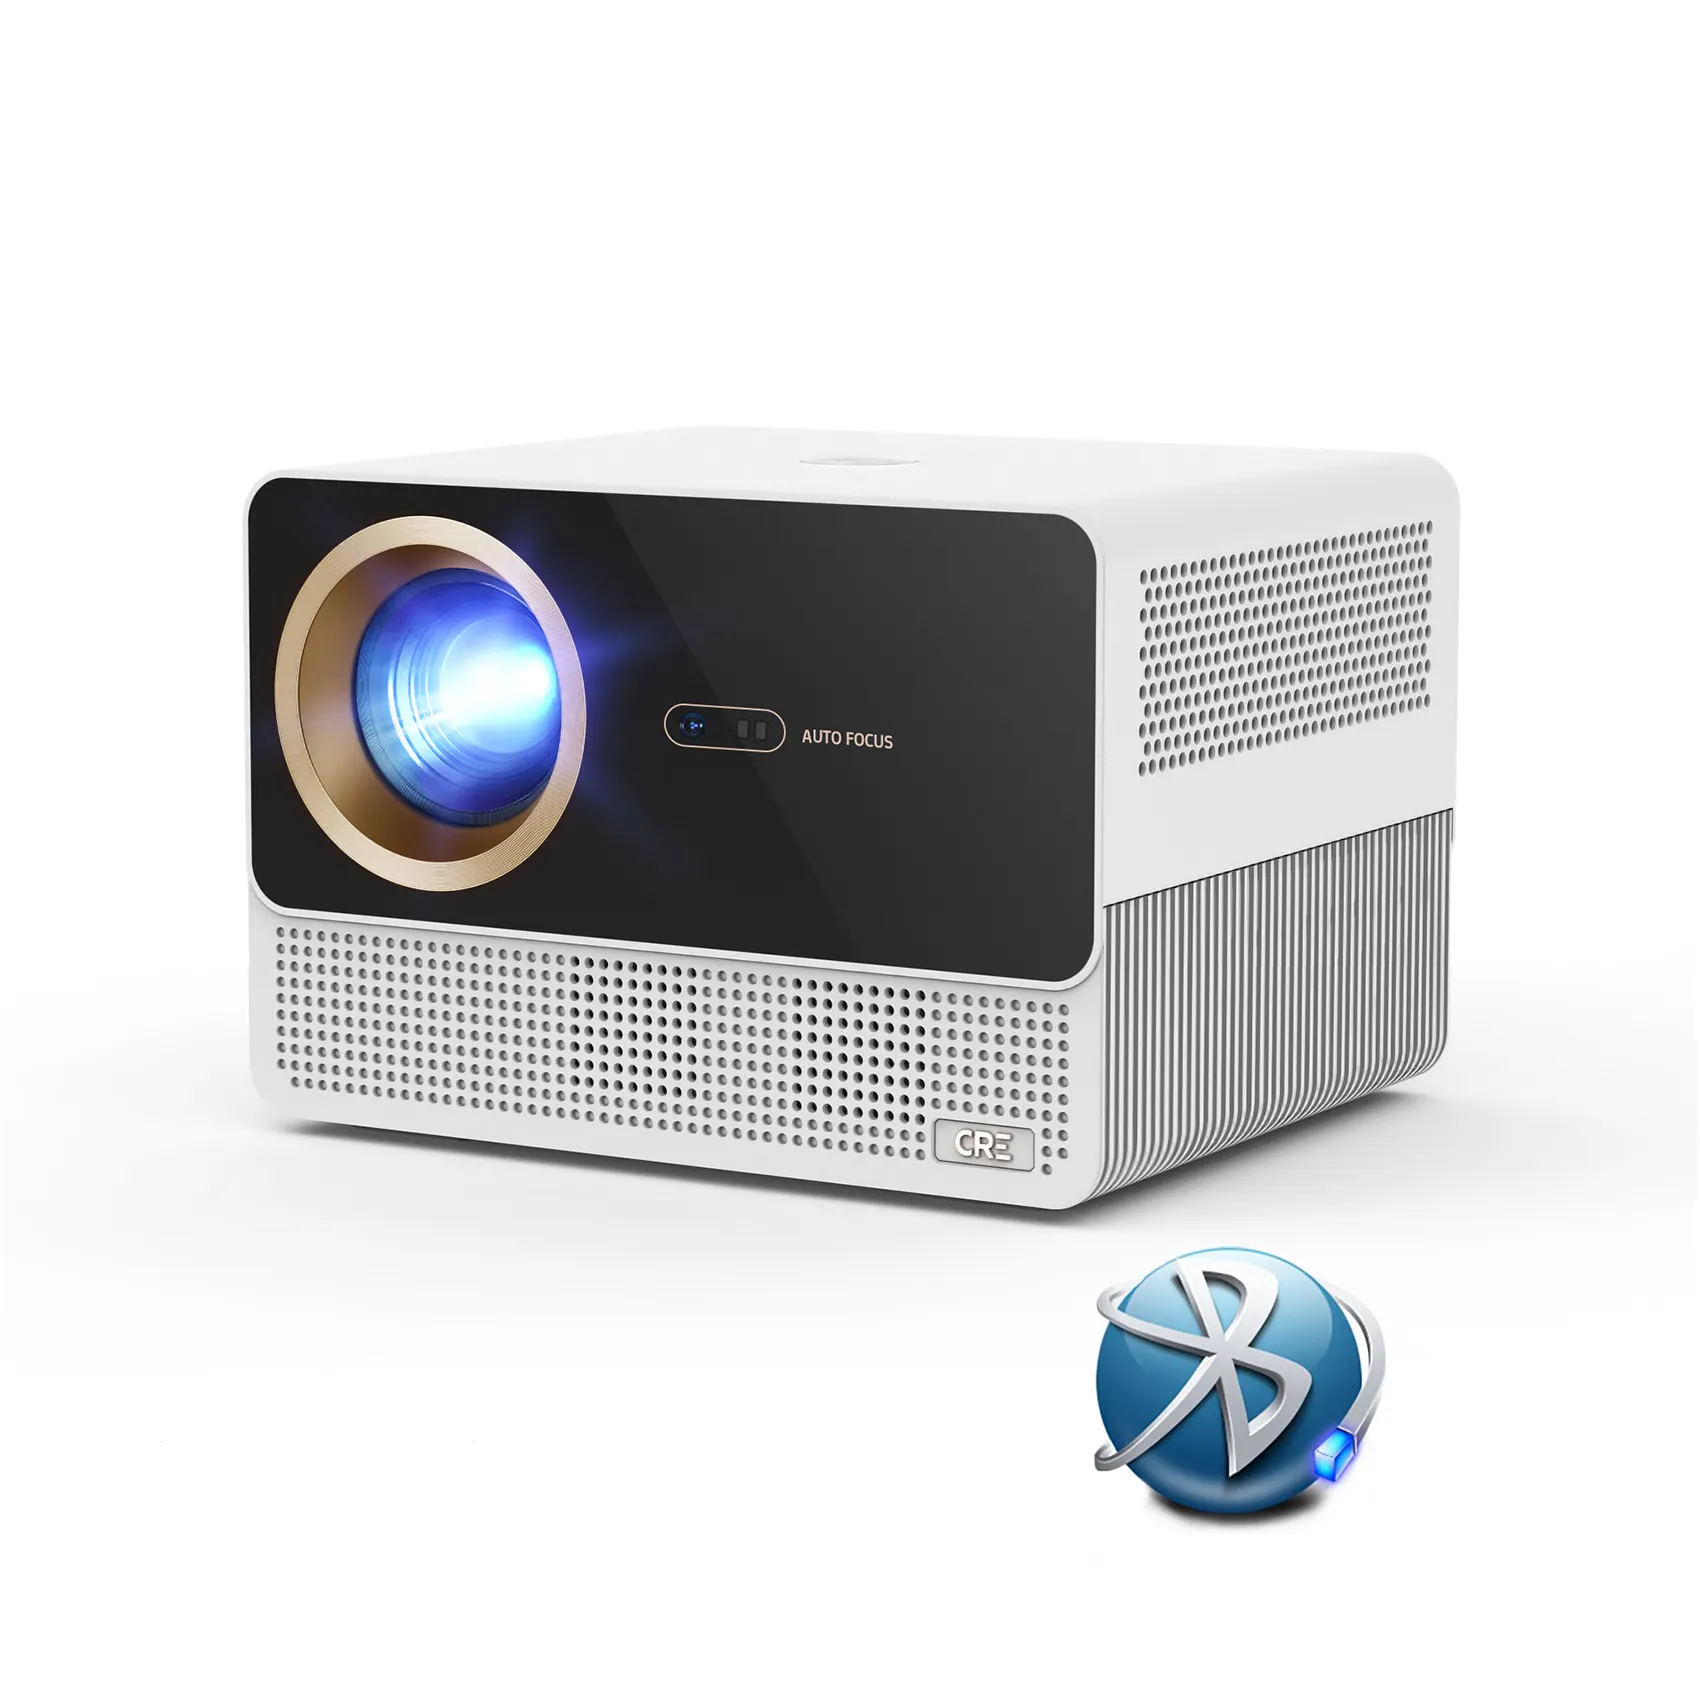 CRE CR67 home theater smart tv full HD proyector contrast 4K WIFI portable digital LED projector